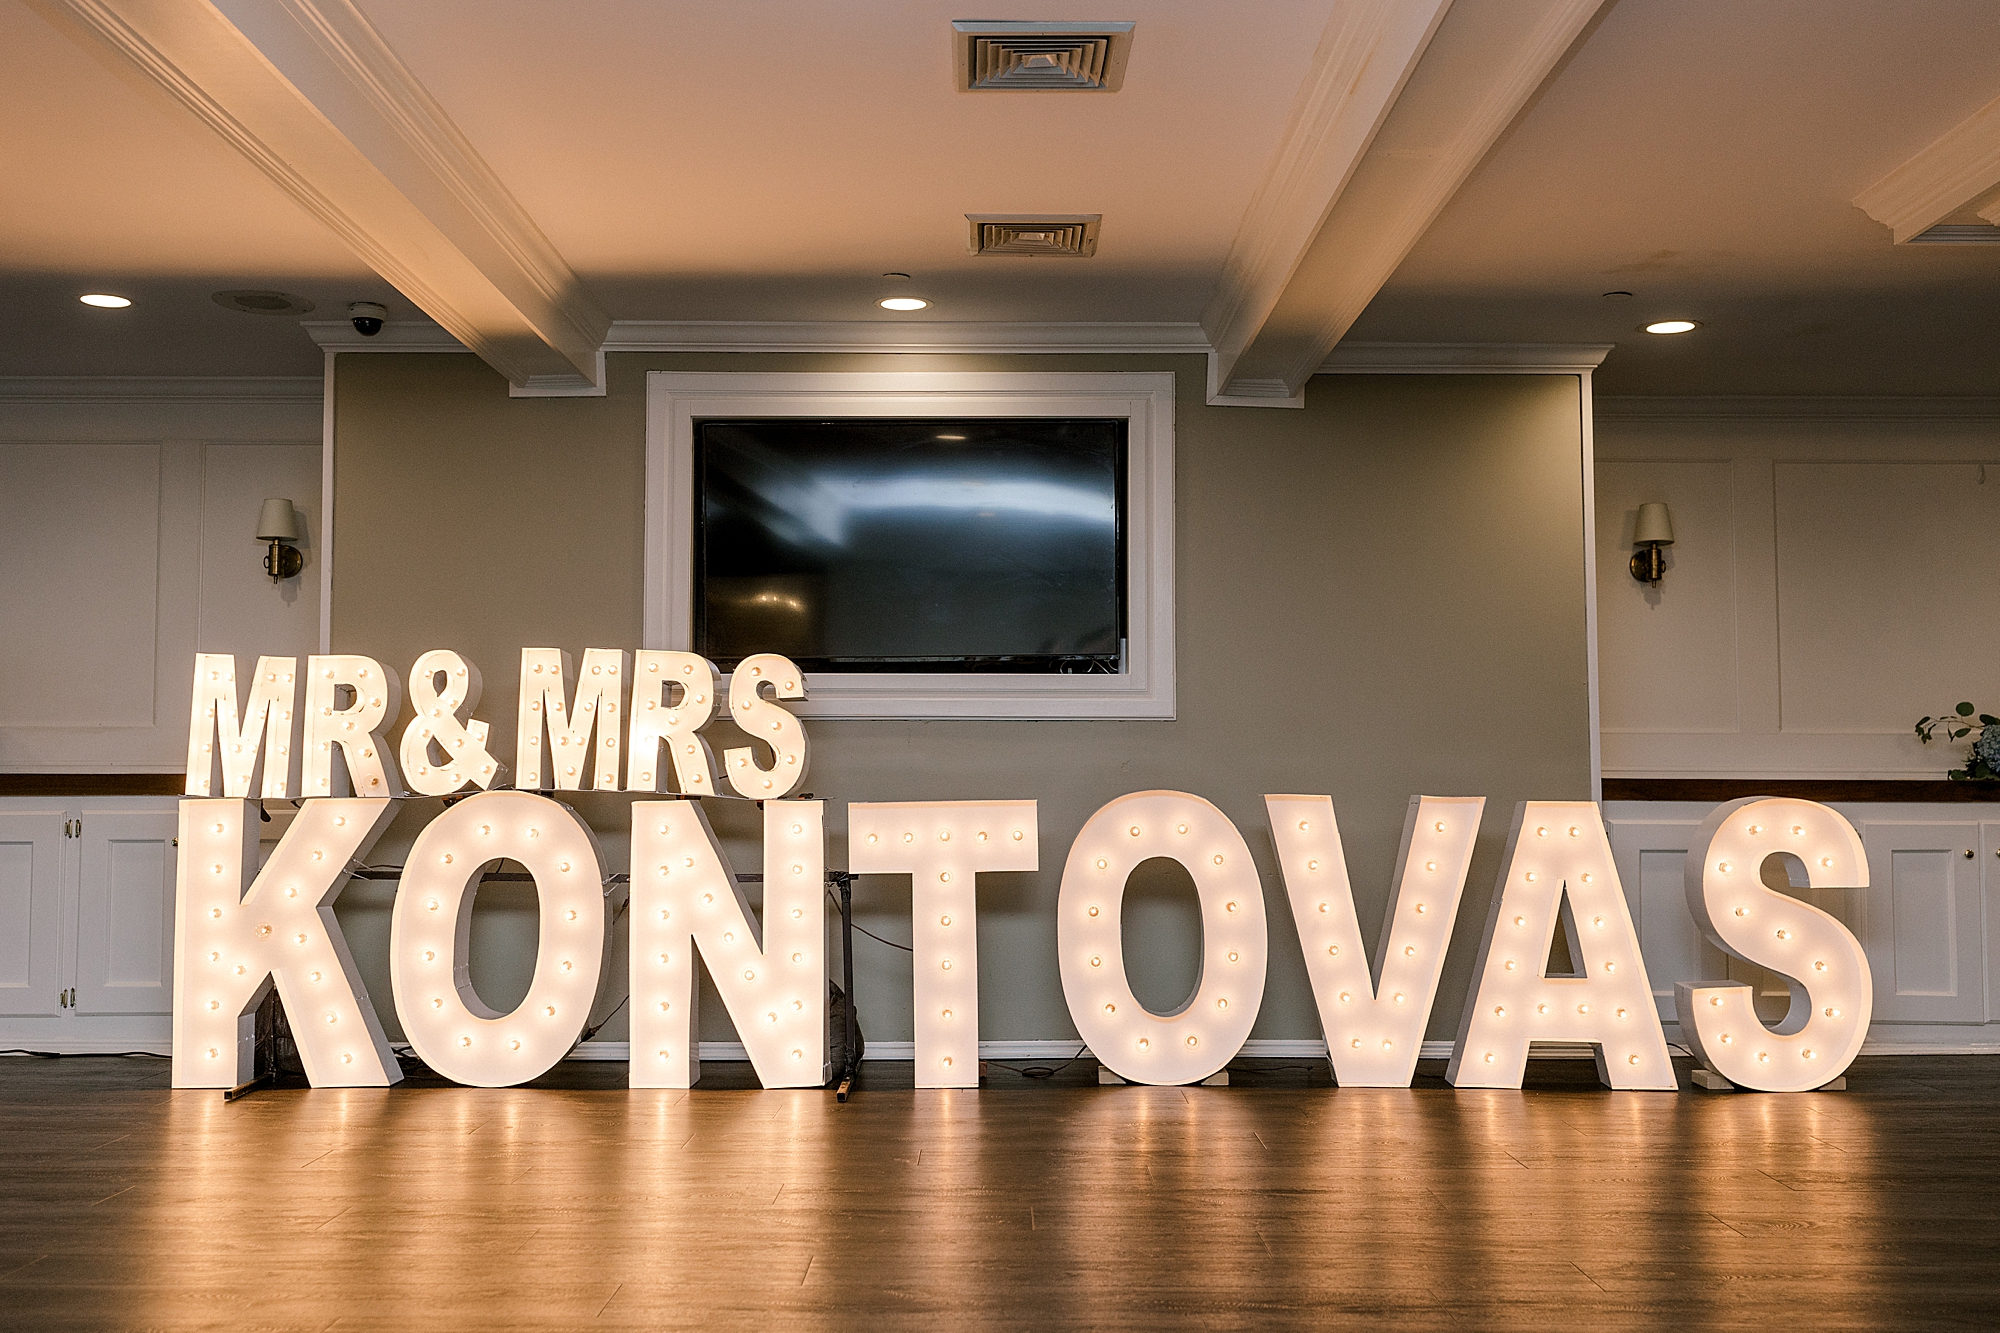 large marquee letters lit in couple's new last name on dance floor